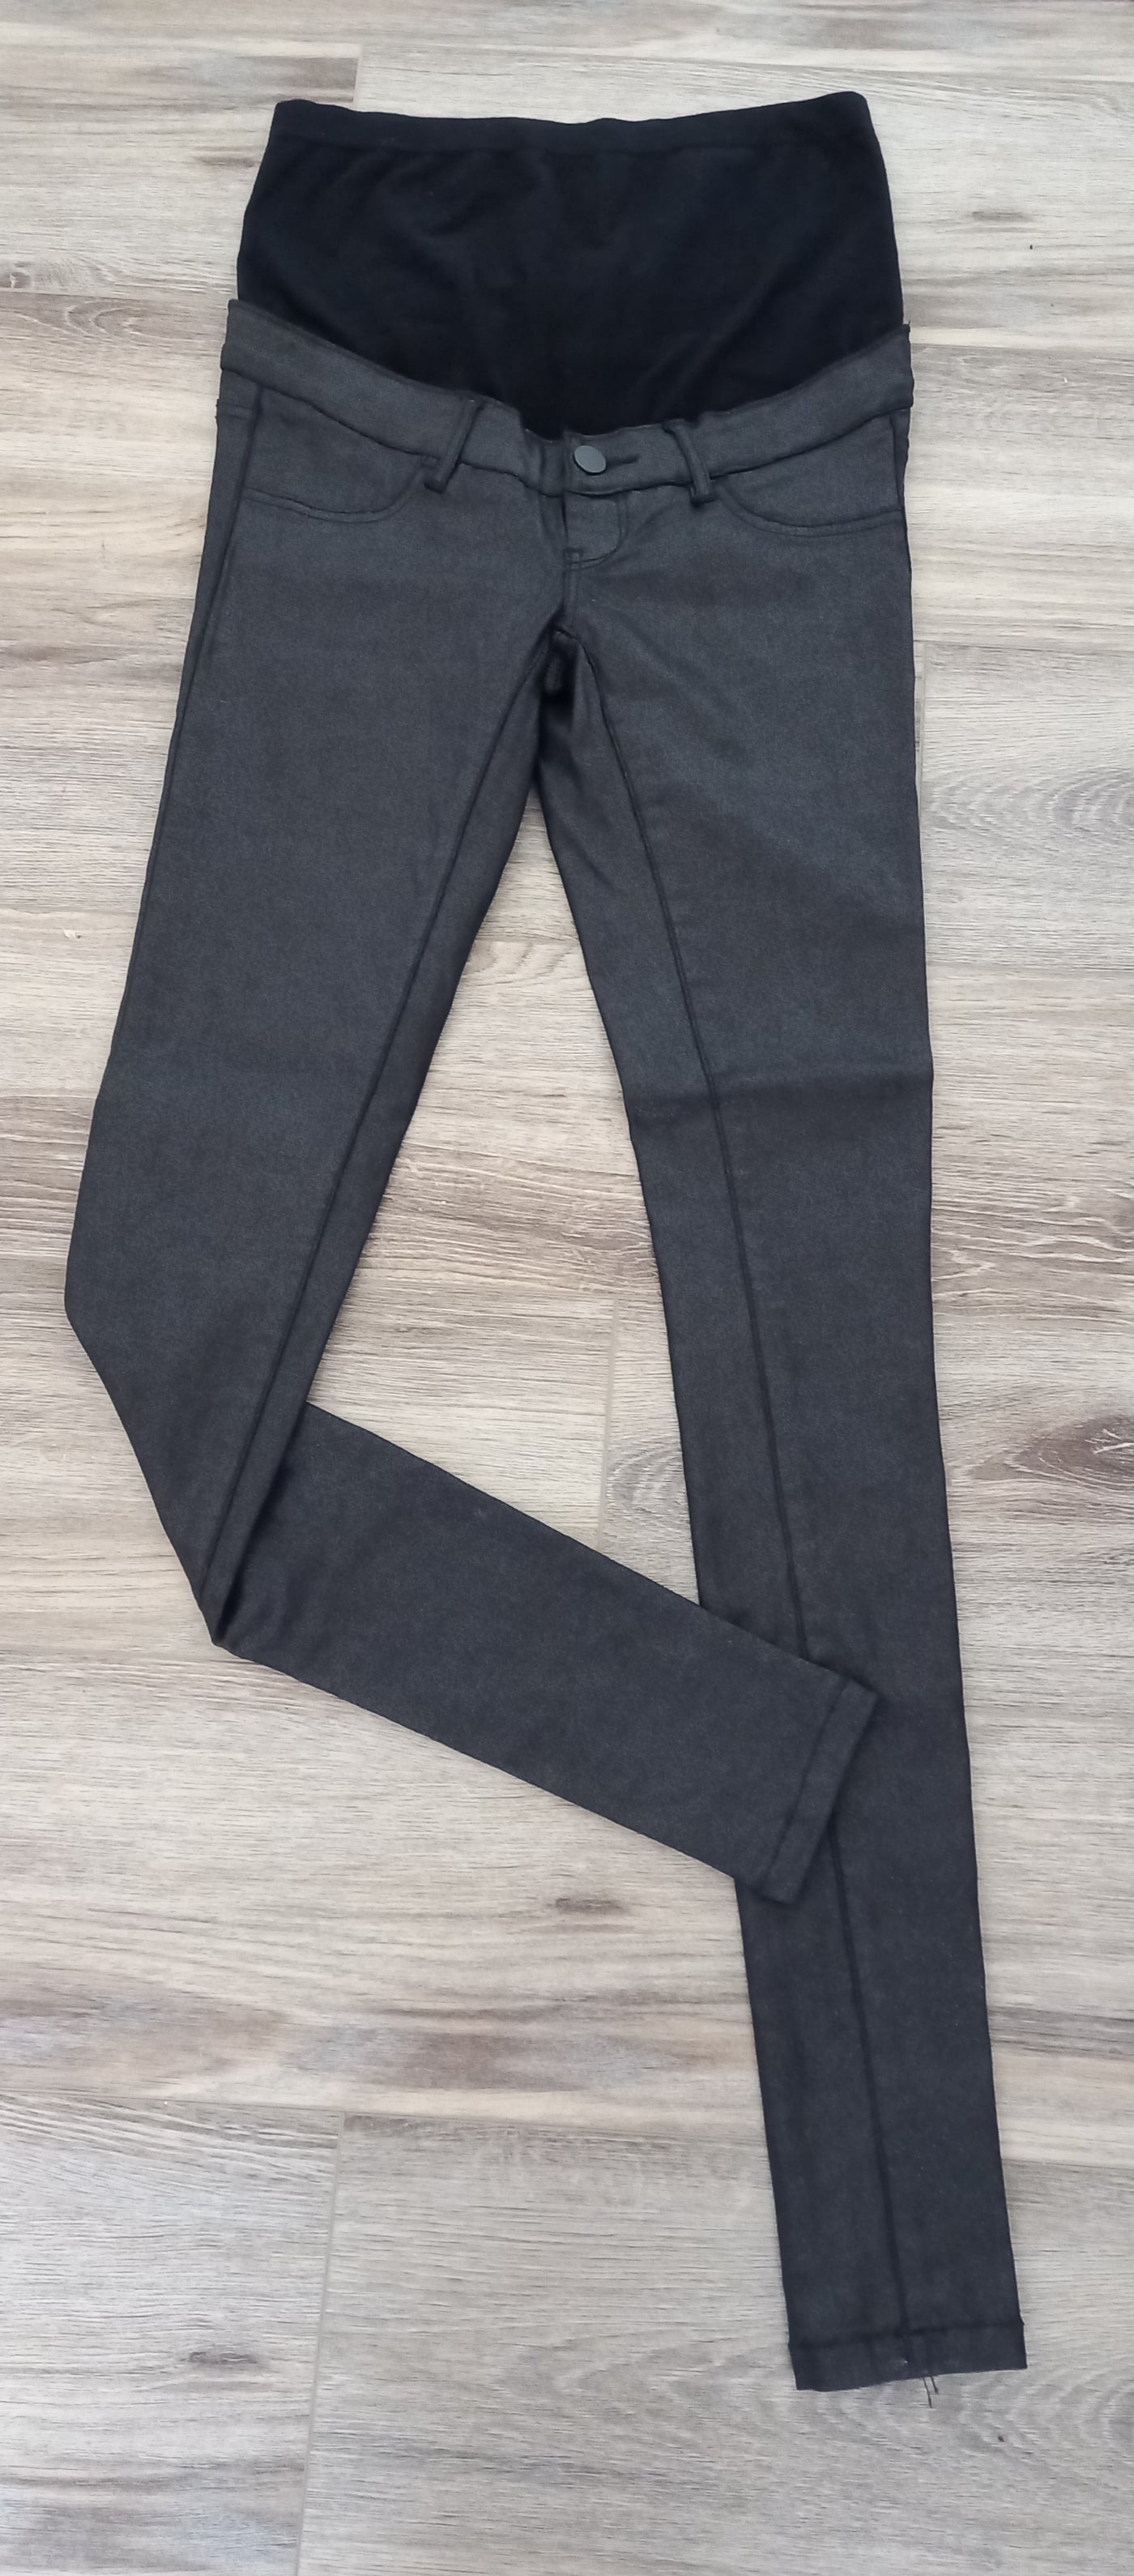 Mamalicious Black Sparkly Overbump Jeans - Size 26/32 (Approx UK 6)